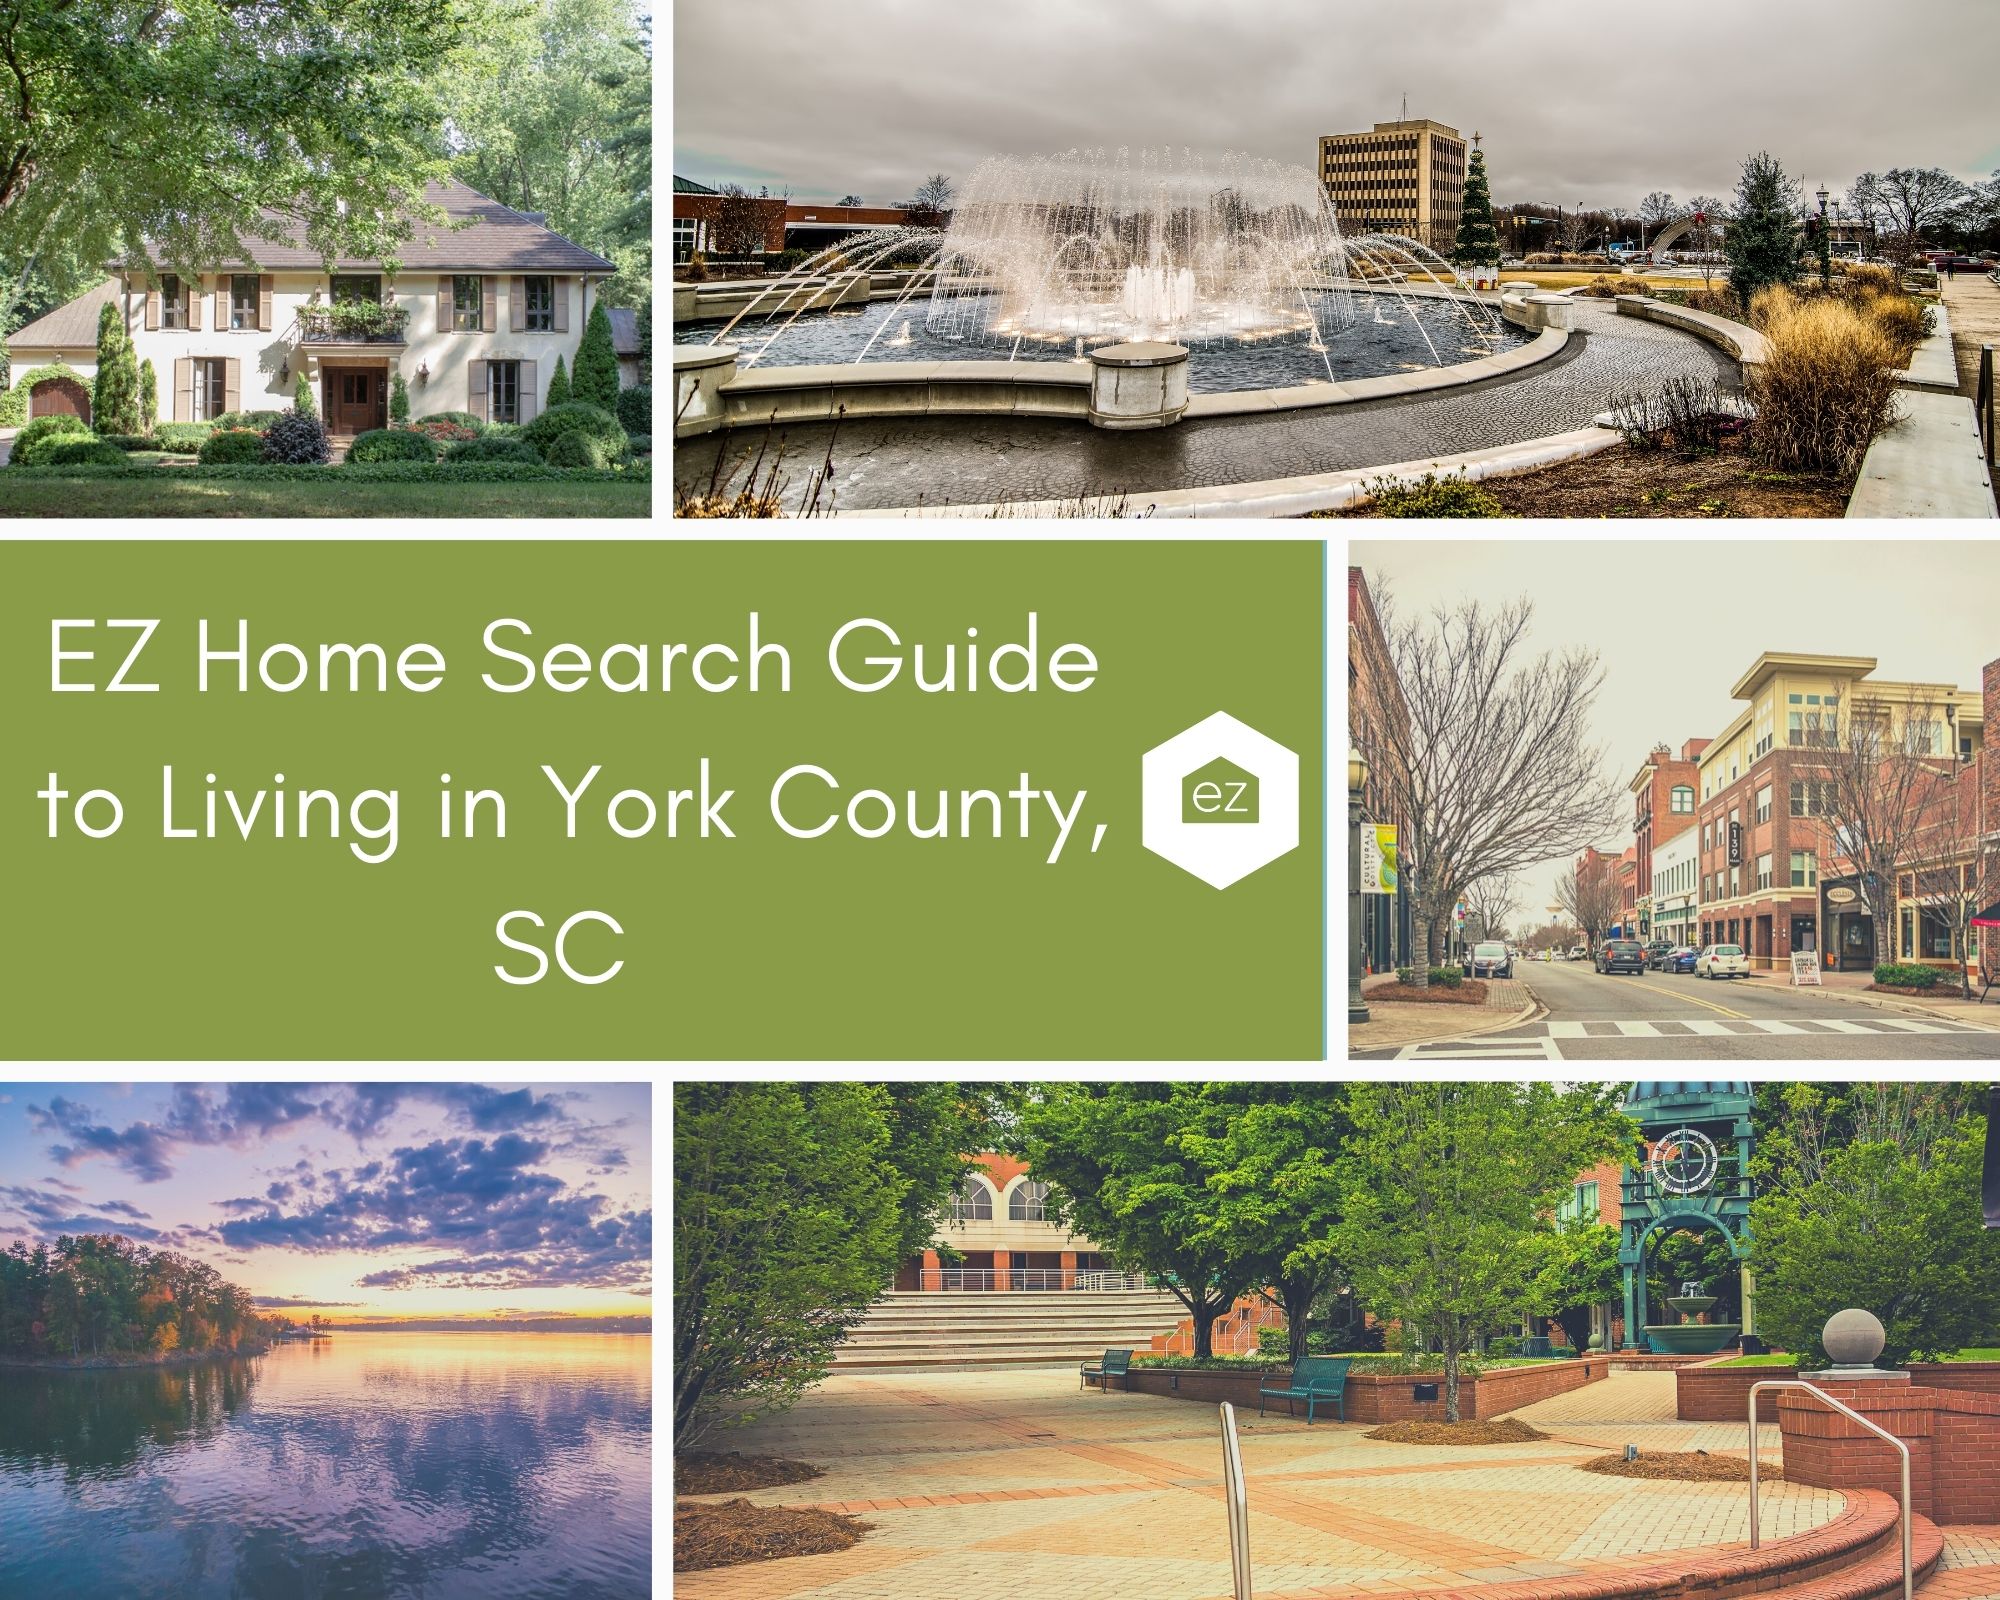 Photos of York County downtown, York County House, and Lake Wylie sunset